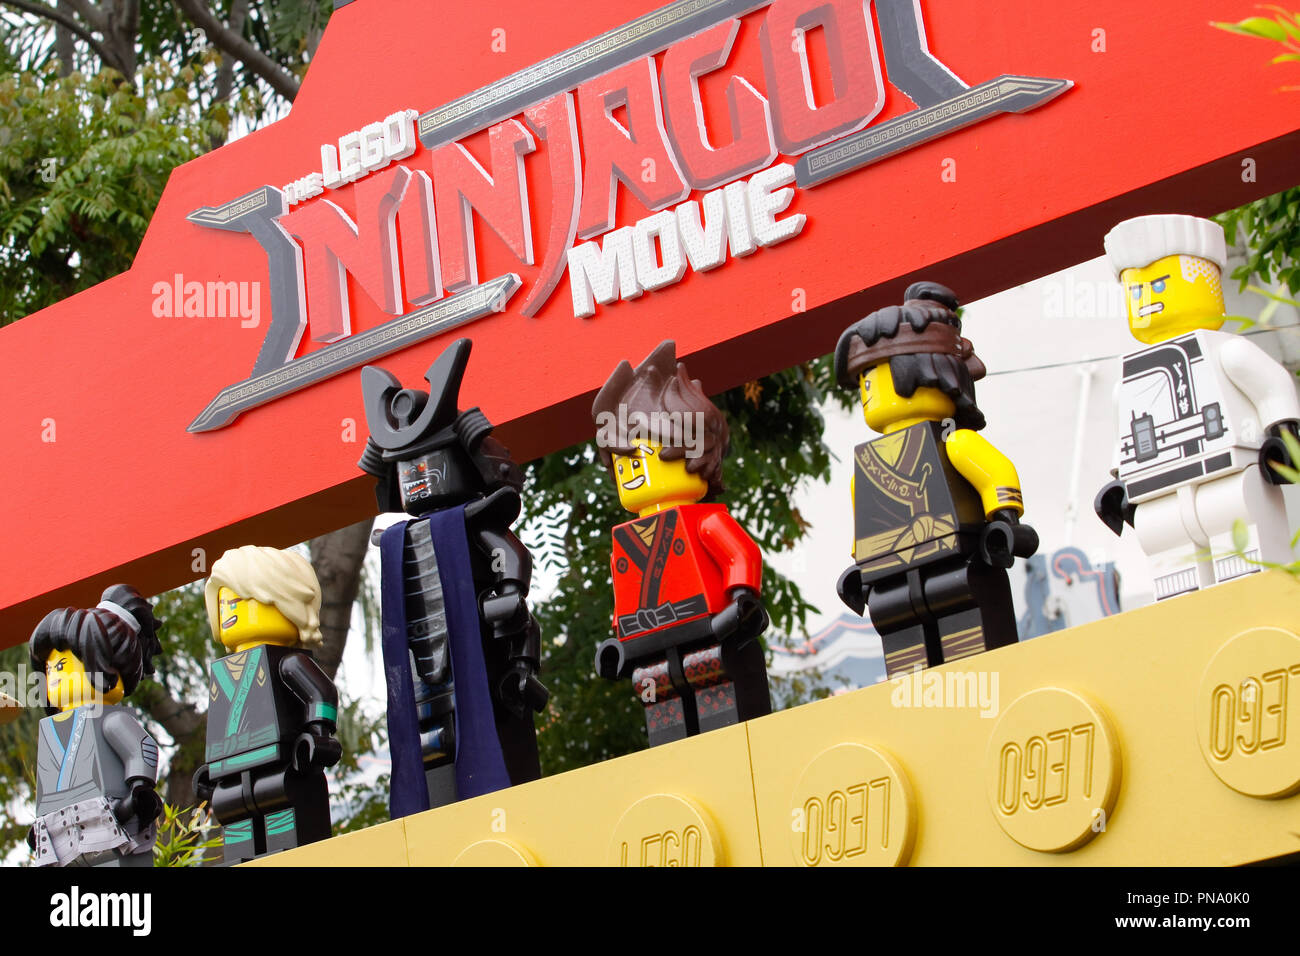 Atmosphere at the World Premiere of Warner Bros' "The Lego Ninjago Movie"  held at the Regency Village Theater in Westwood, CA, September 16, 2017.  Photo by Joseph Martinez / PictureLux Stock Photo - Alamy